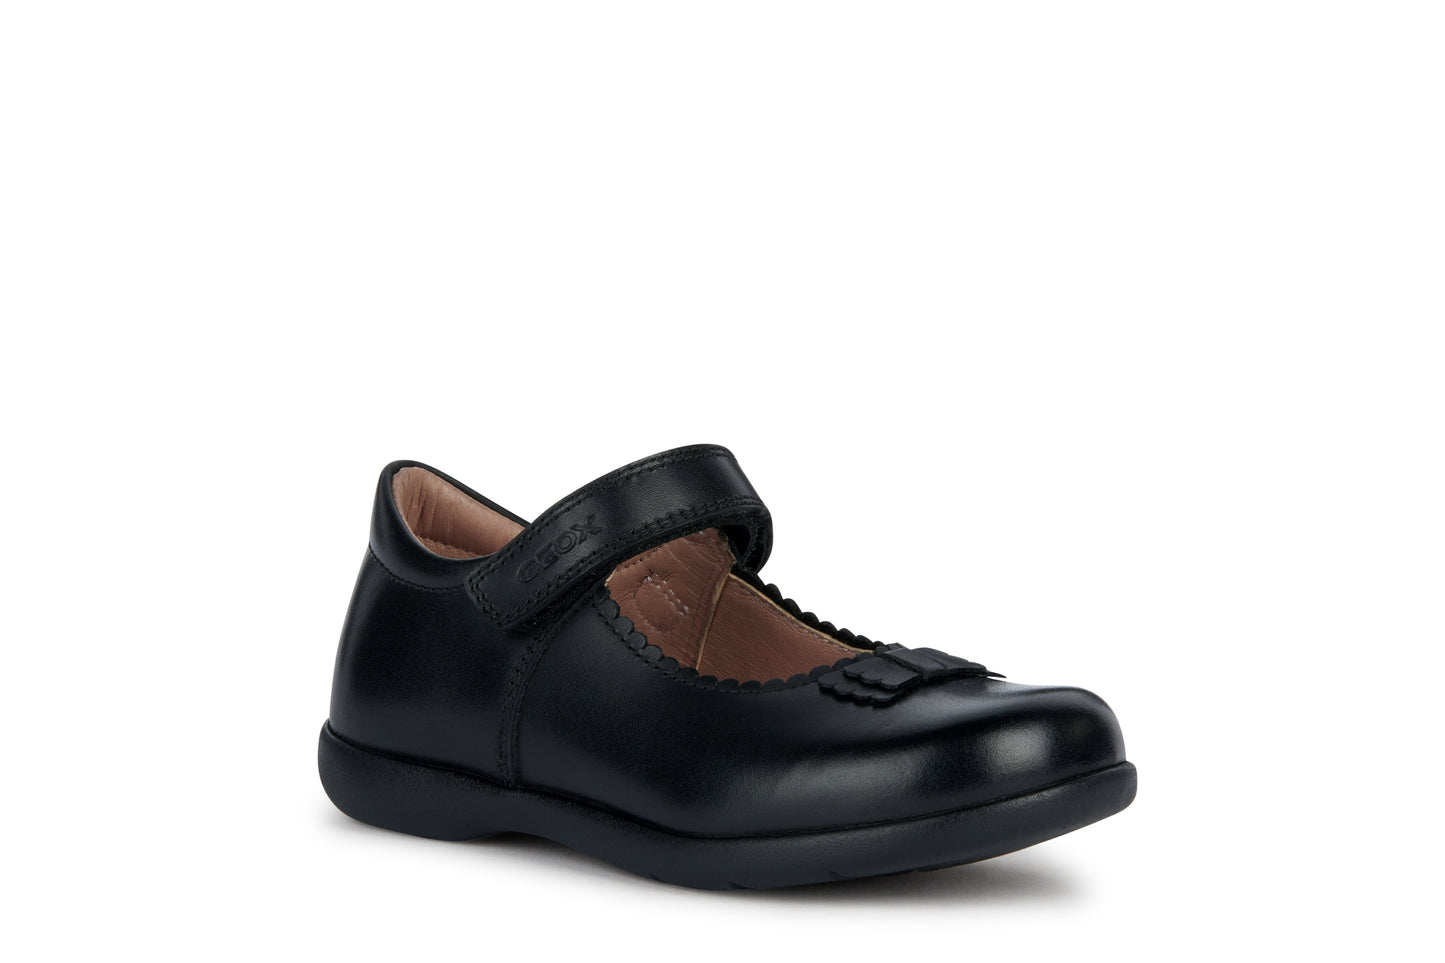 A girls school shoe by Geox, style Naimara in black with velcro strap. Angled view.